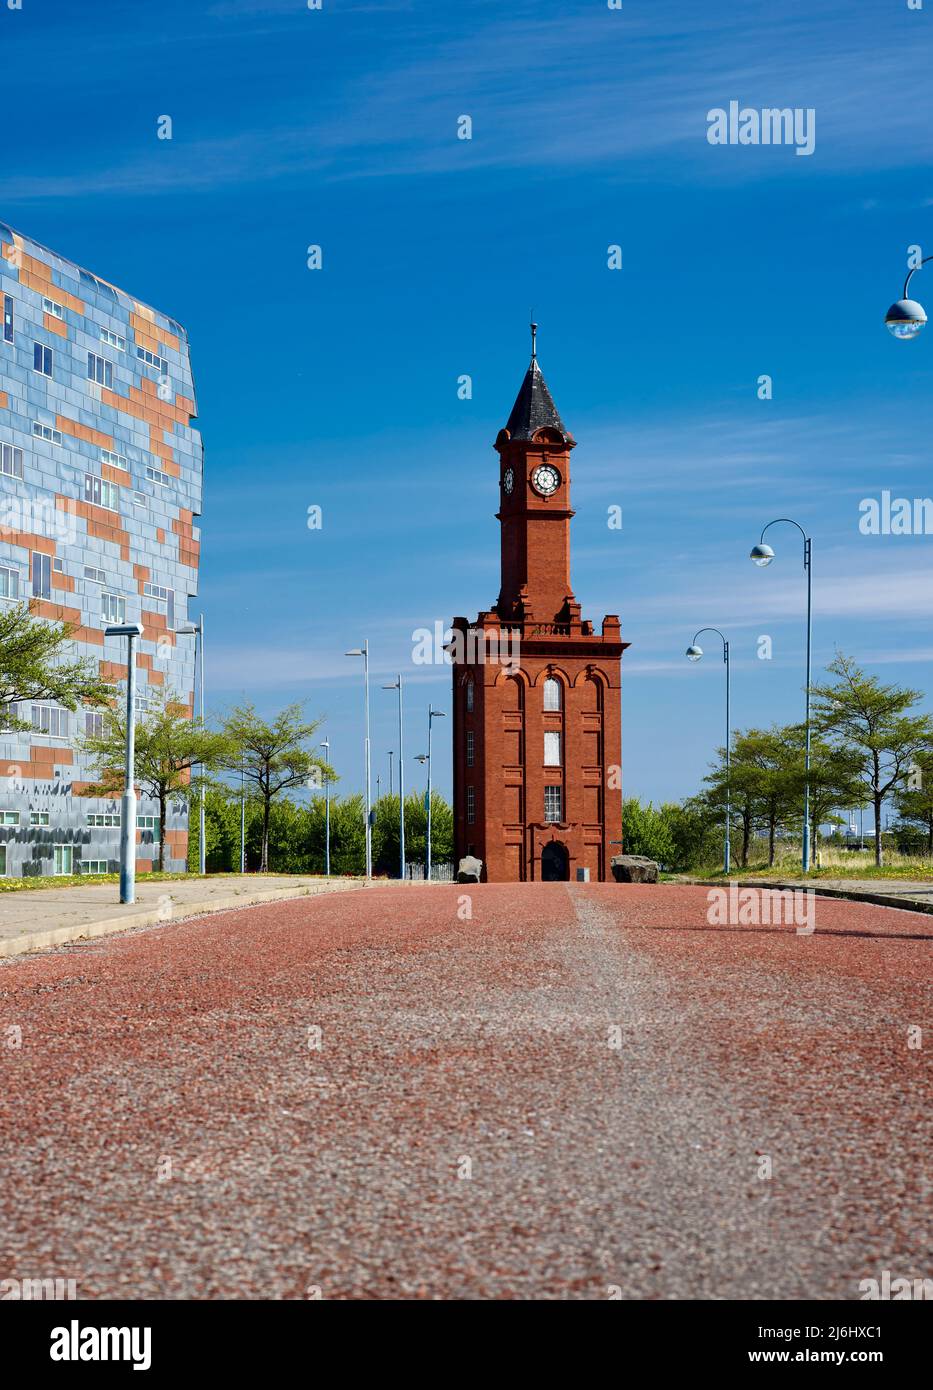 Clock tower at Middlehaven Middlesbrough Stock Photo